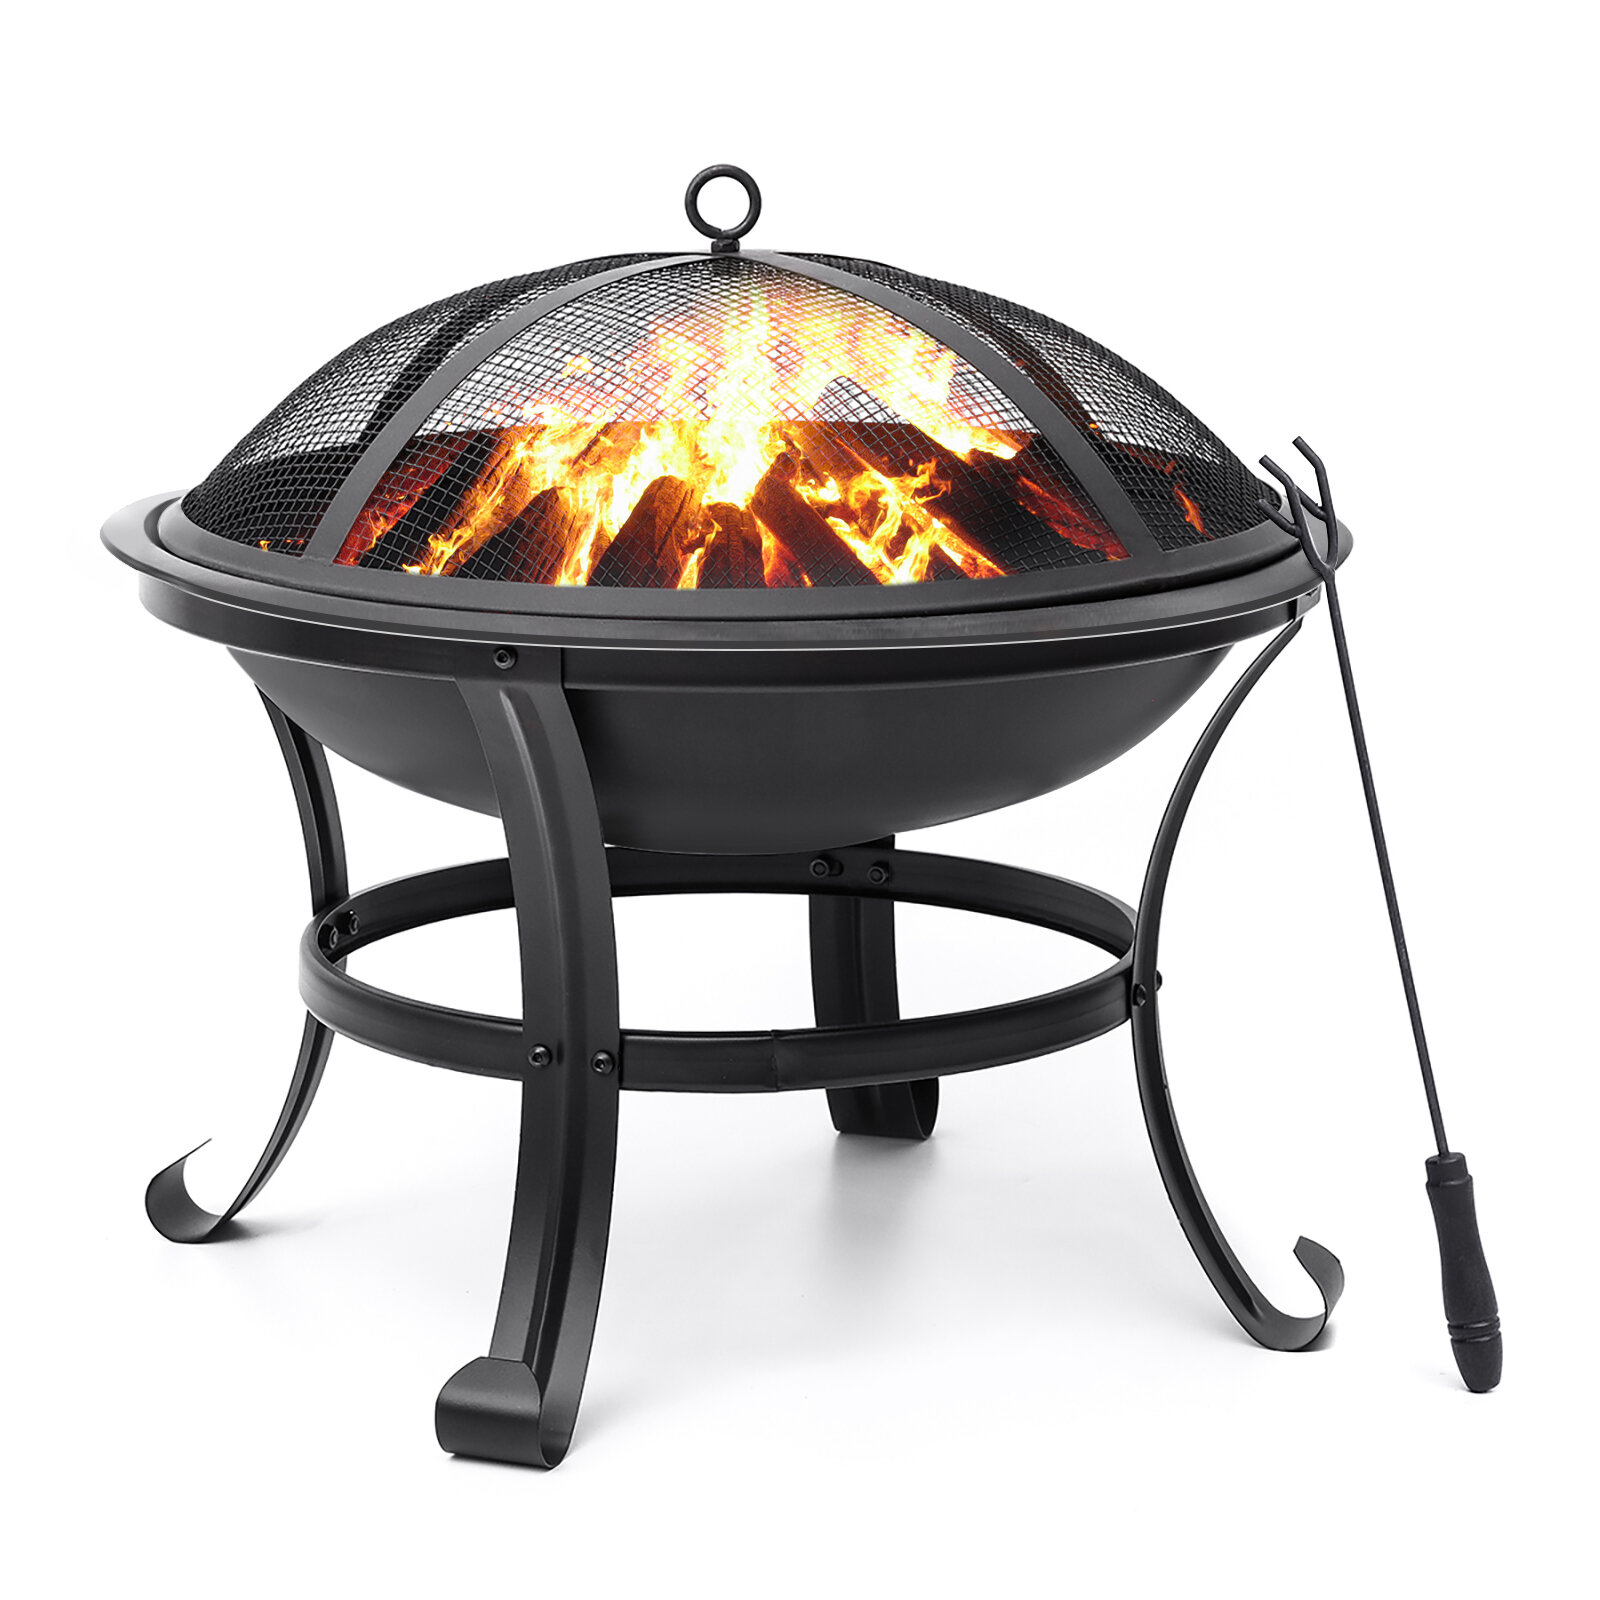 Image of Kingso 22 inch Fire Pit SteelWood Burning Small Firepit with Spark Screen Log Grate Poker